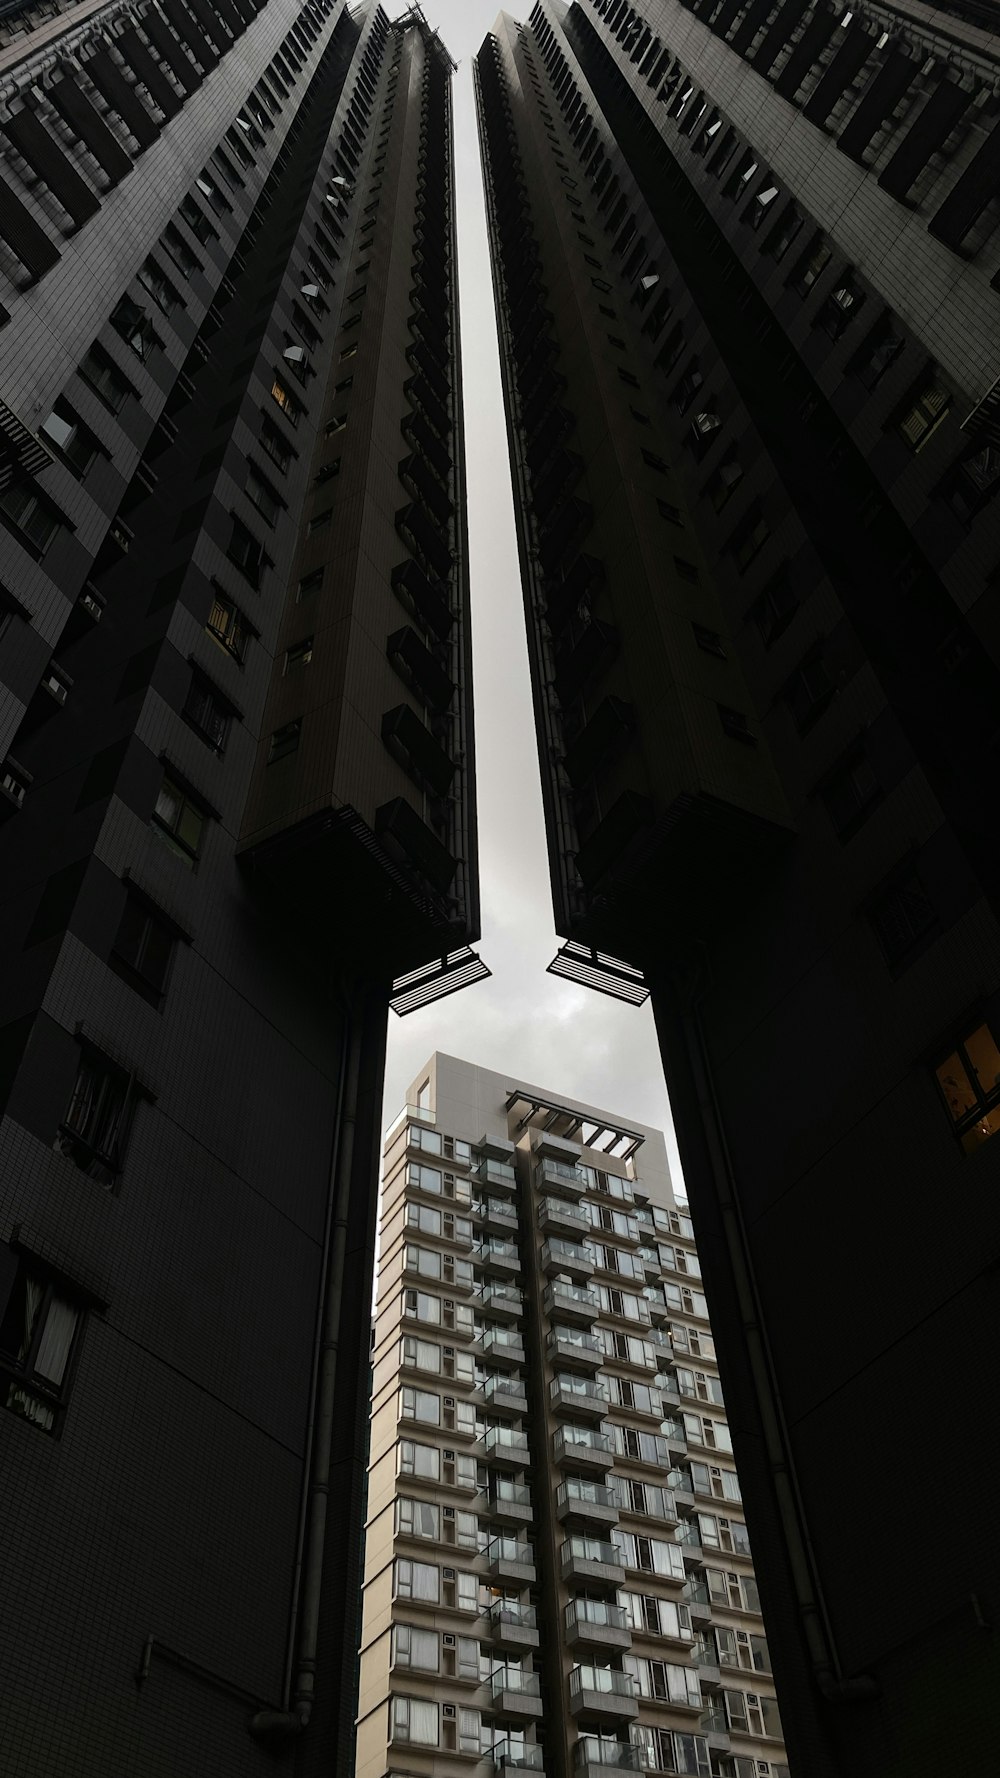 two tall buildings are seen from the ground